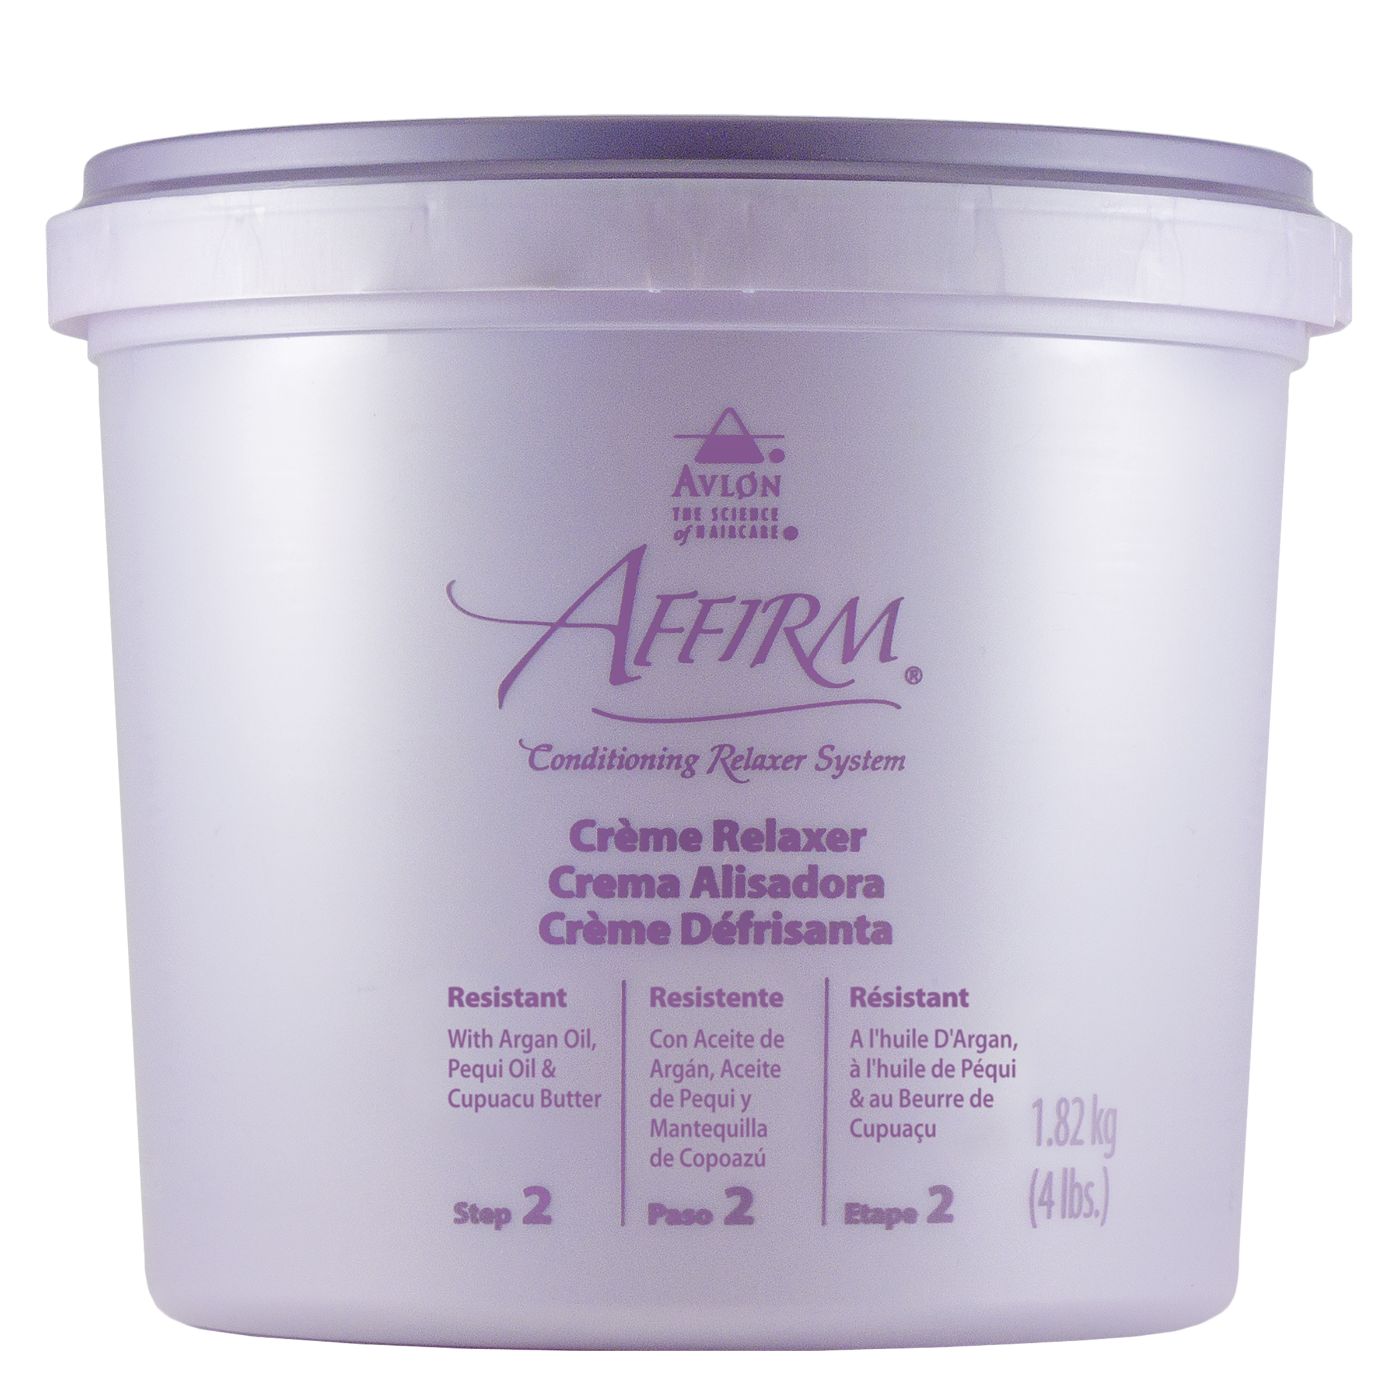 Affirm Creme Relaxer - Resistant